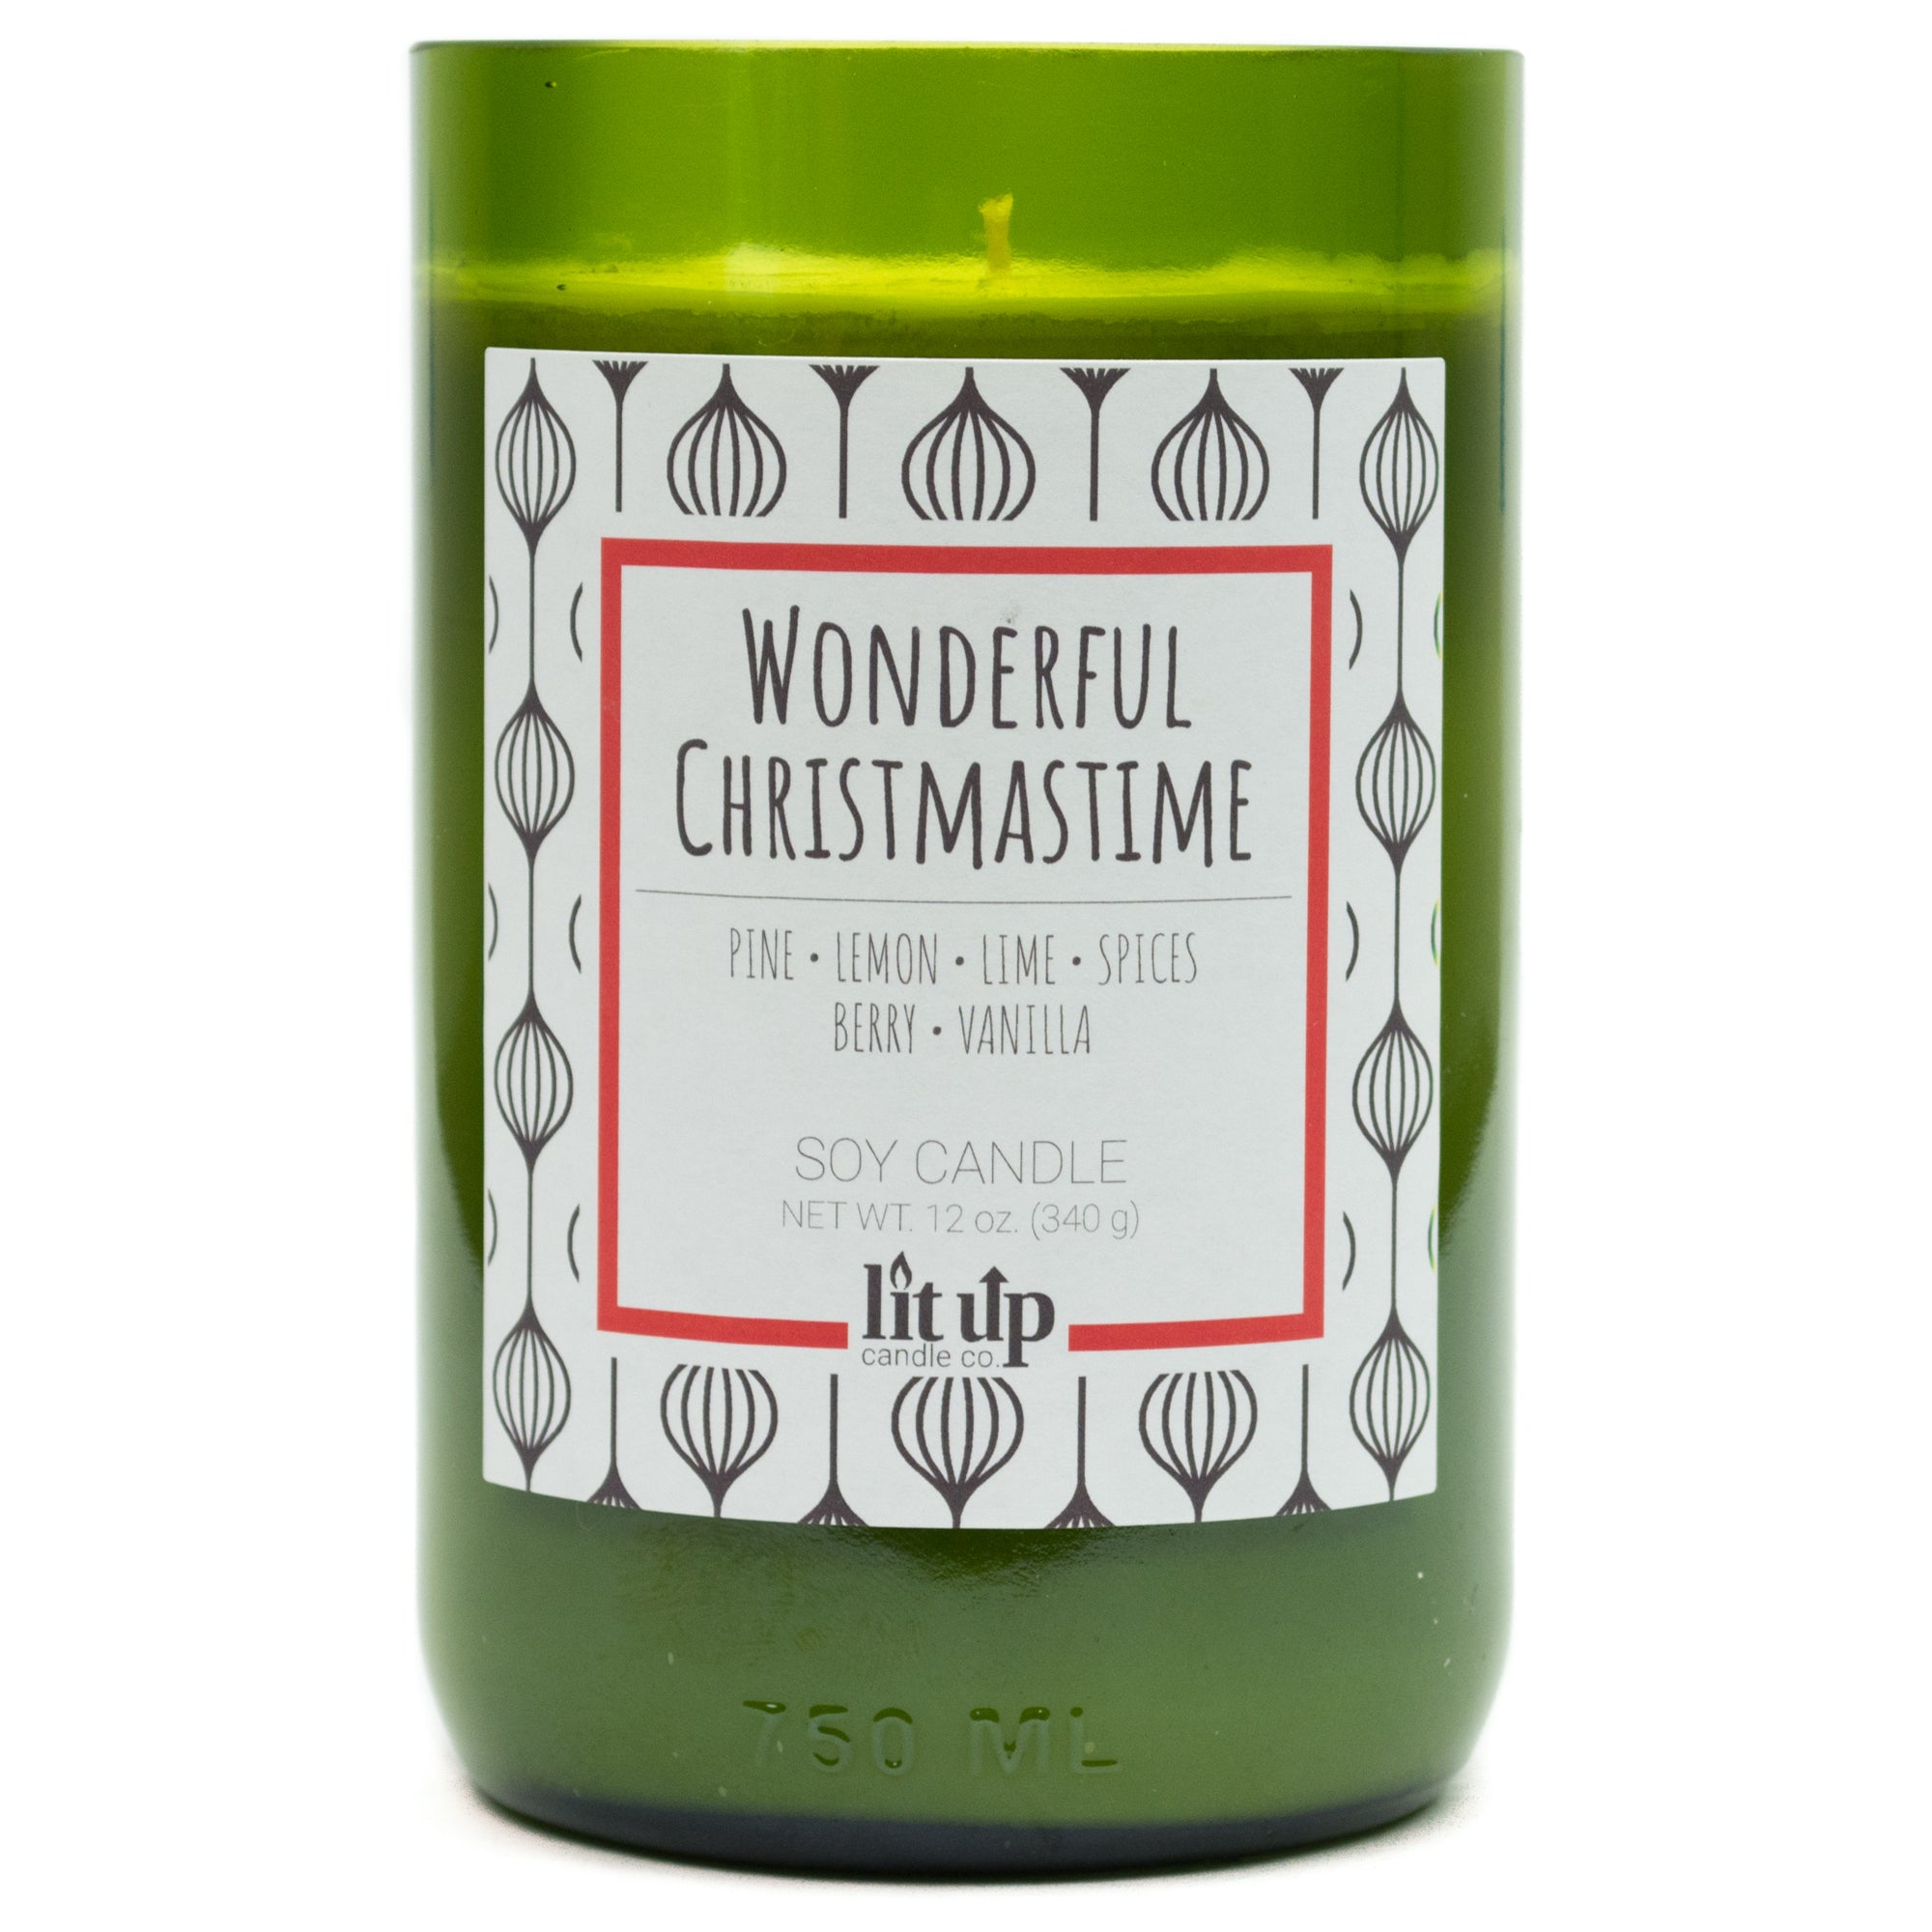 Wonderful Christmastime scented 12 oz. soy candle in upcycled wine bottle - FKA Christmas Hearth